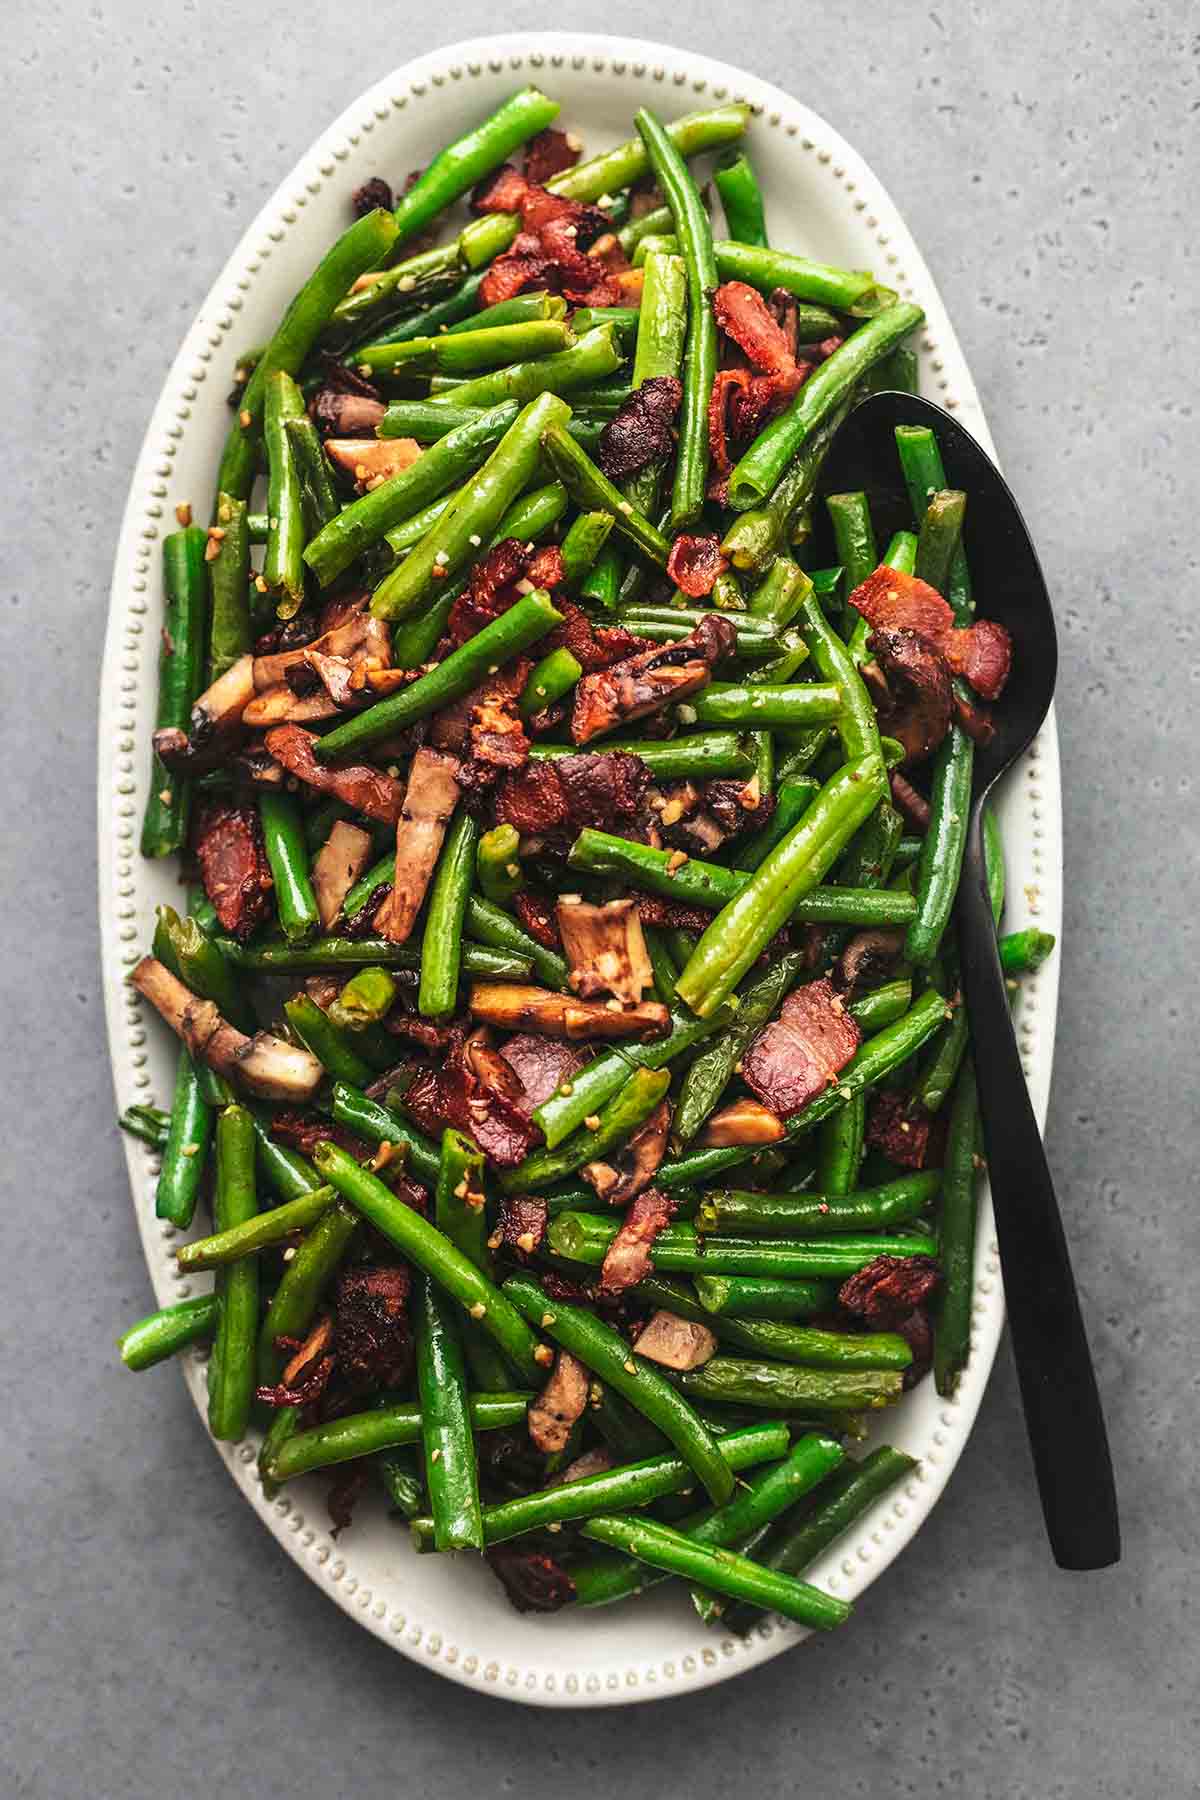 How To Make Slow Cooker Green Beans Recipe (Easy Side Dish)